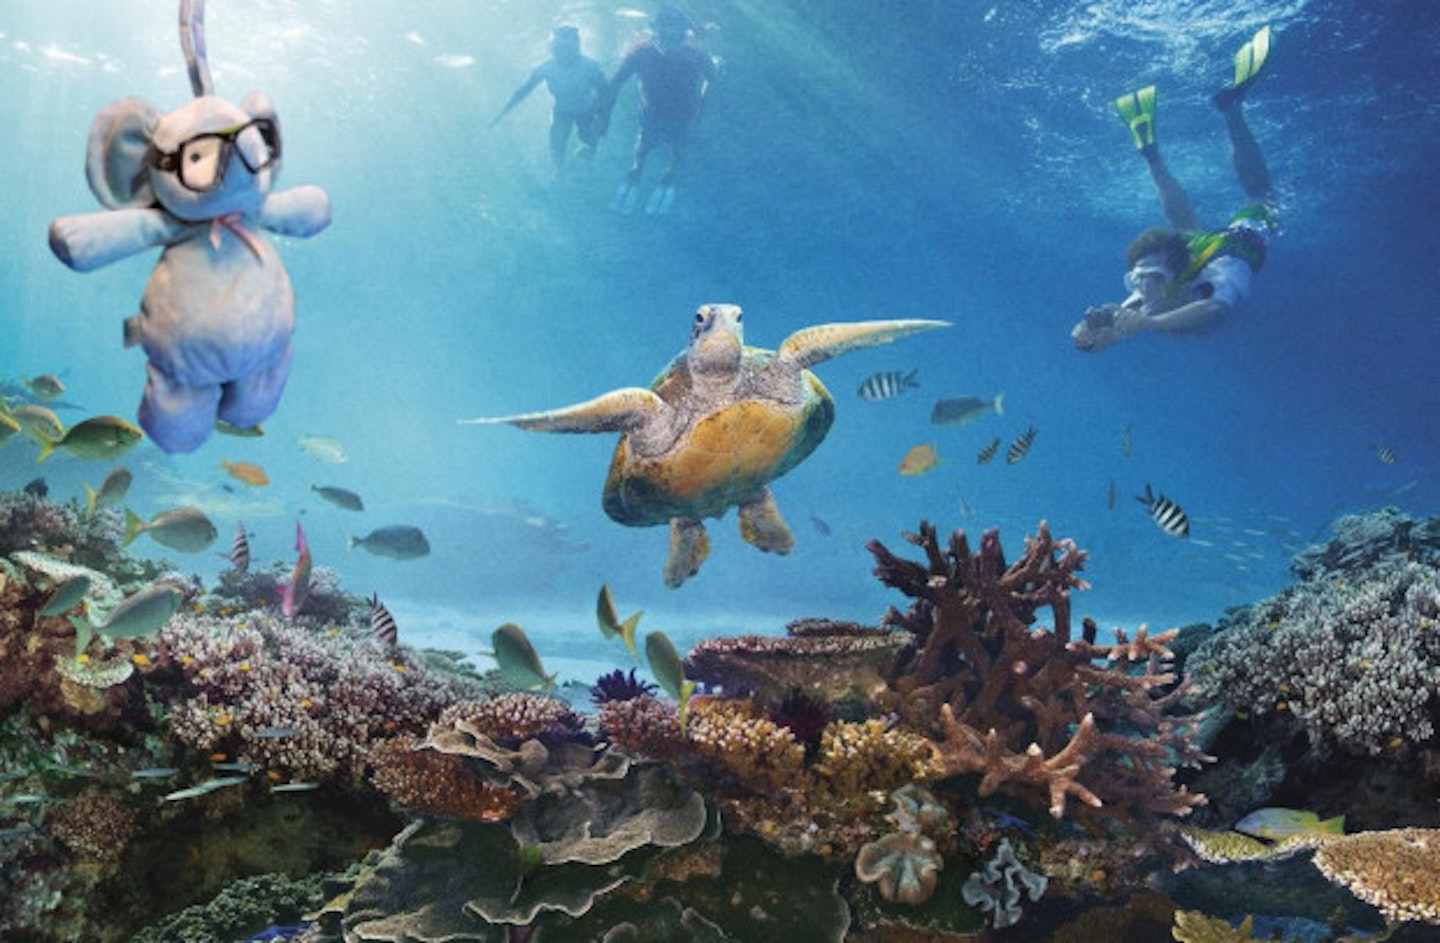 Photoshop elephant toy visits the Great Barrier Reef